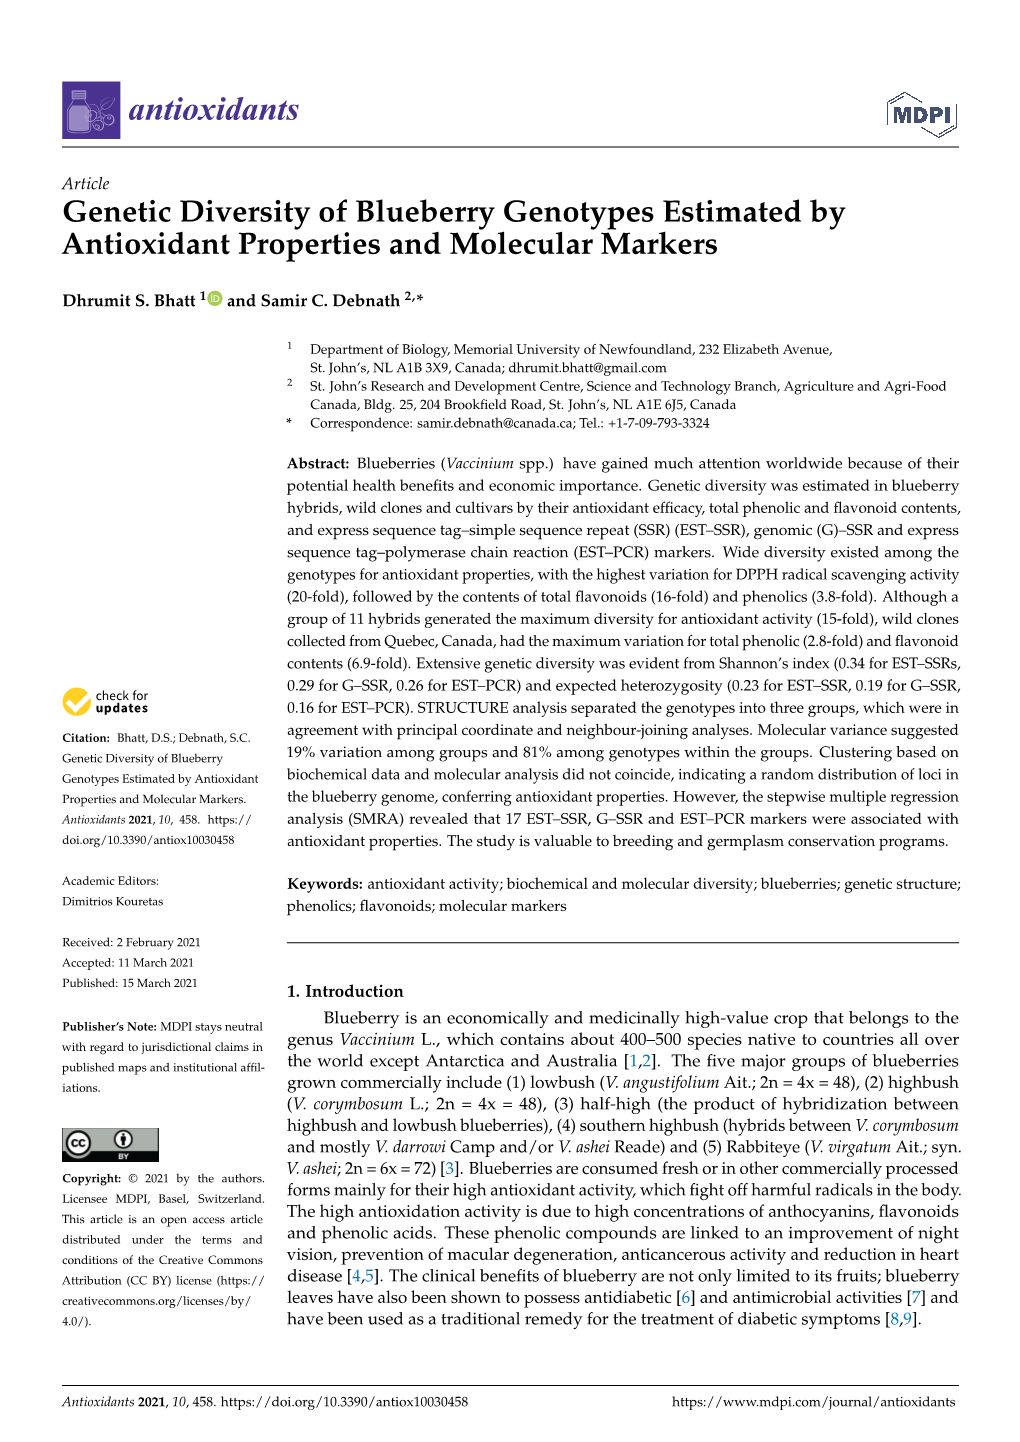 Genetic Diversity of Blueberry Genotypes Estimated by Antioxidant Properties and Molecular Markers